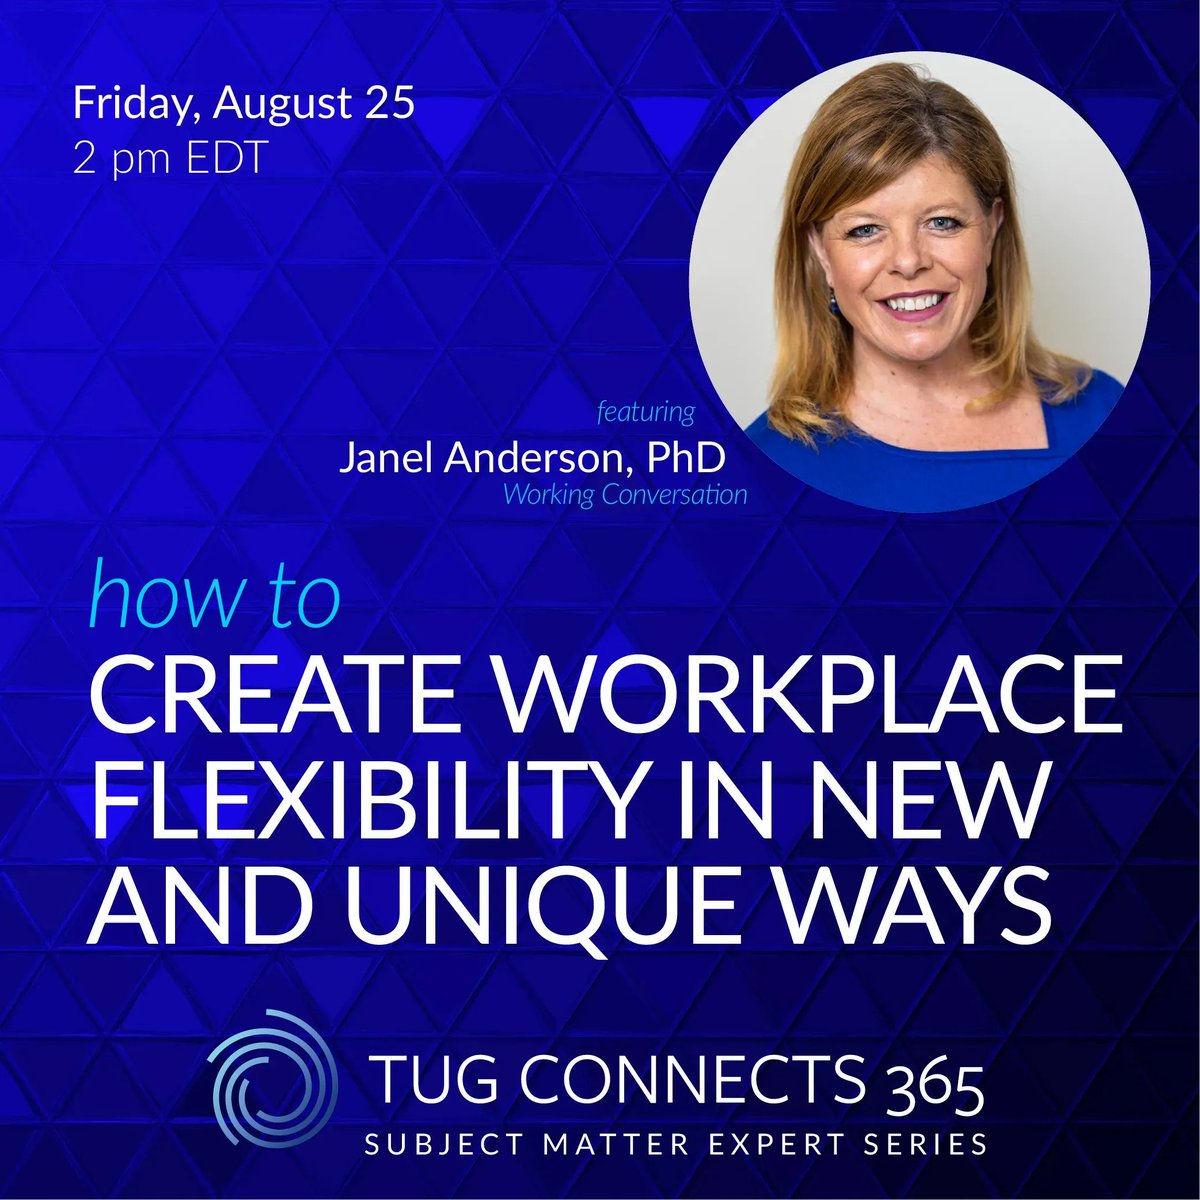 Join the discussion and explore innovative approaches to workplace flexibility. Register at link in profile!

#InforDistribution
#Distribution
#TC365
#TUGconnects365
#workplaceflexibility
#flexwork
#FlexibleWork
#FlexibleWorkArrangements
#RTO 
#NoMoreWFH
#WFH
#futureofwork